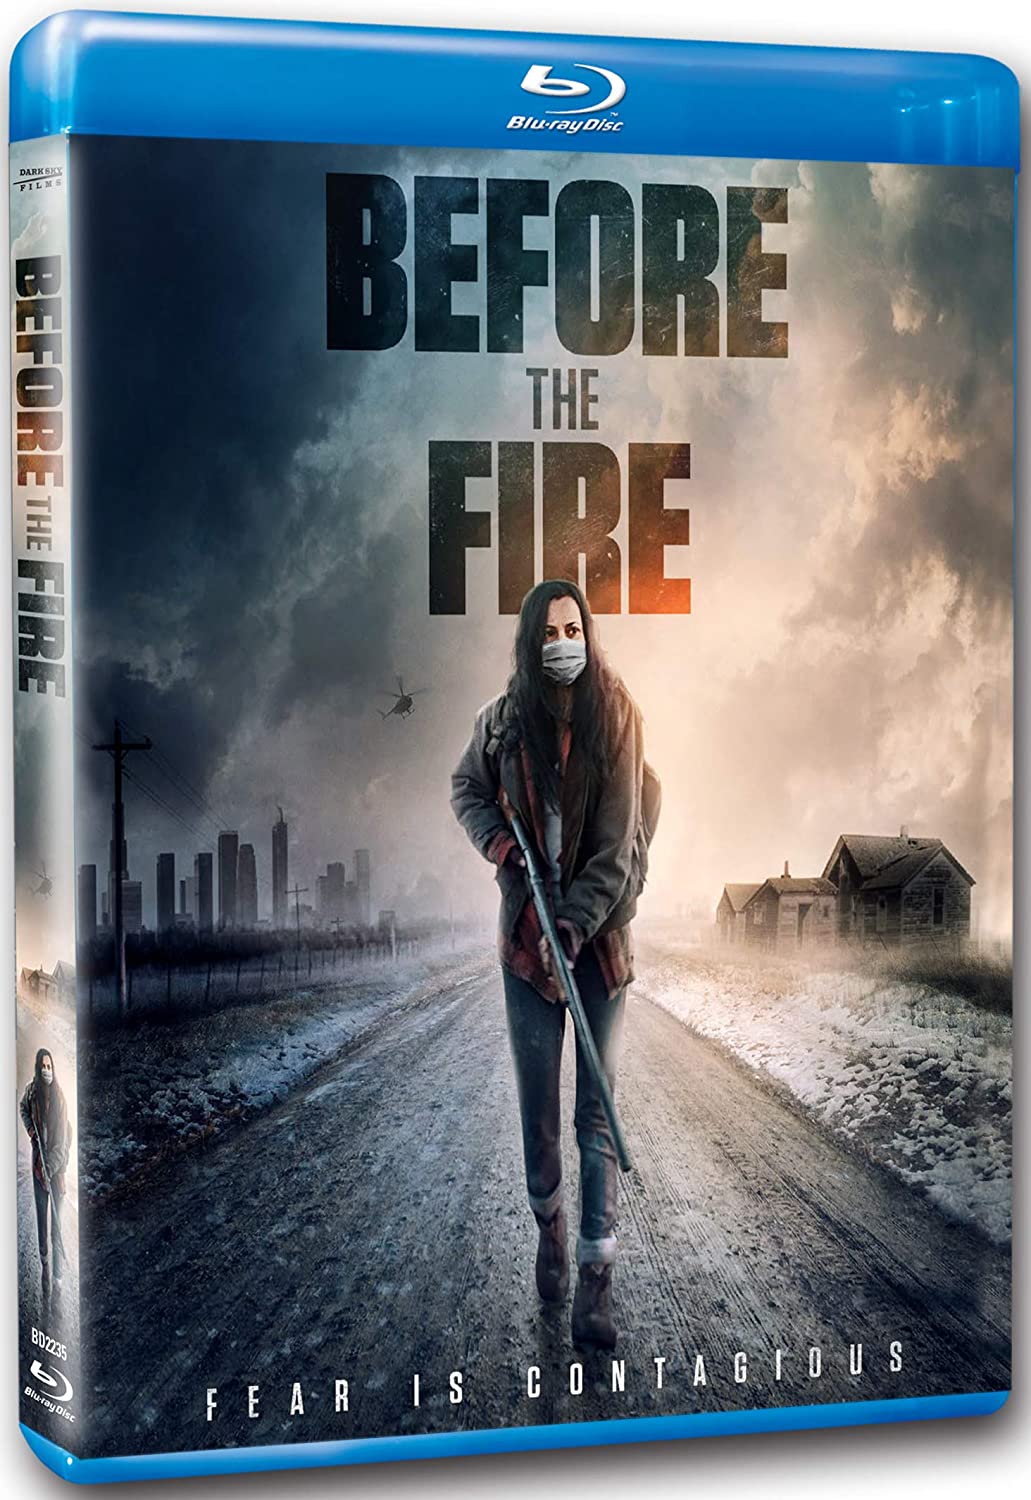 Before The Fire - Darkside Records